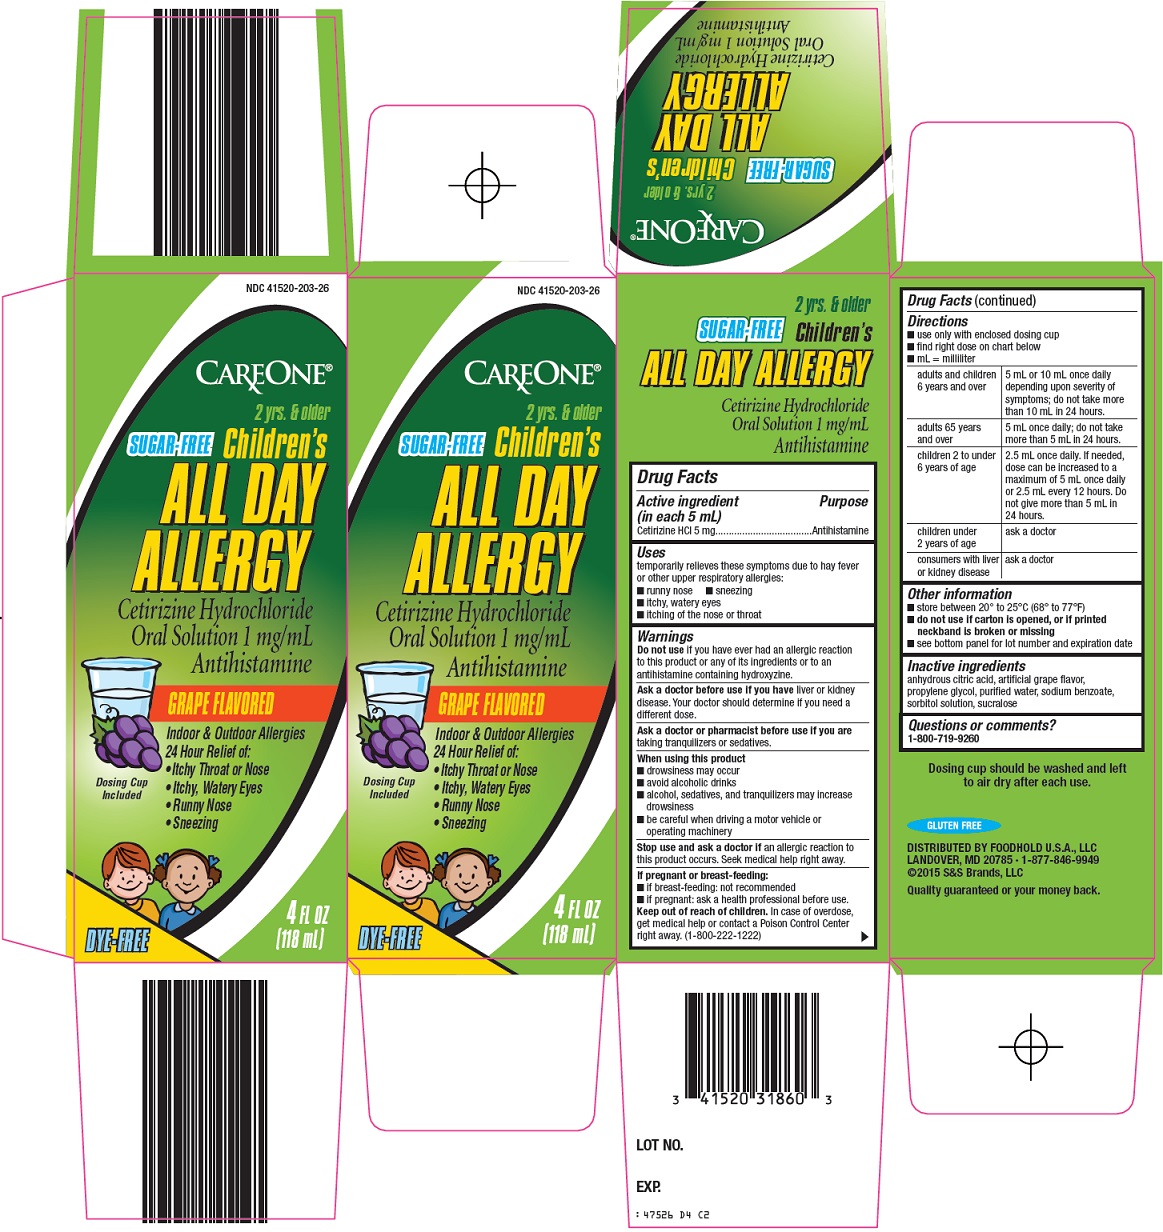 CareOne All Day Allergy Image